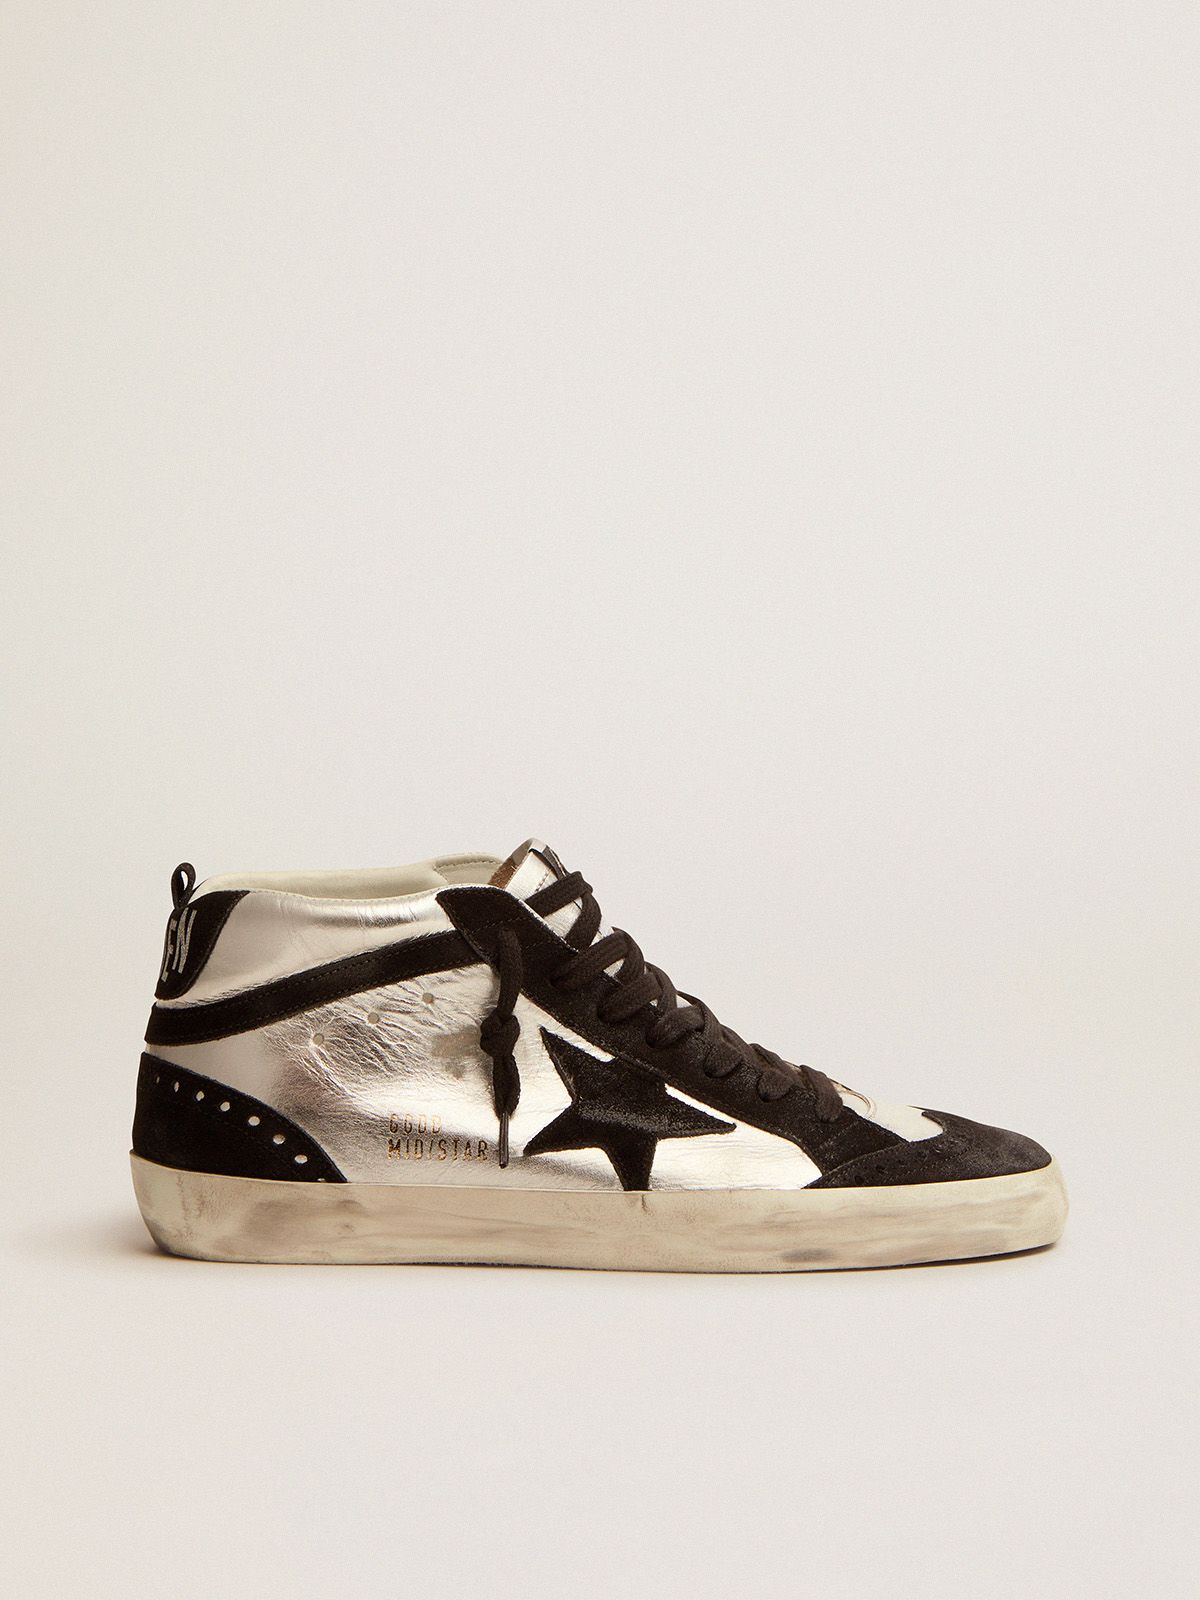 Mid Star LTD sneakers in silver laminated leather and black suede